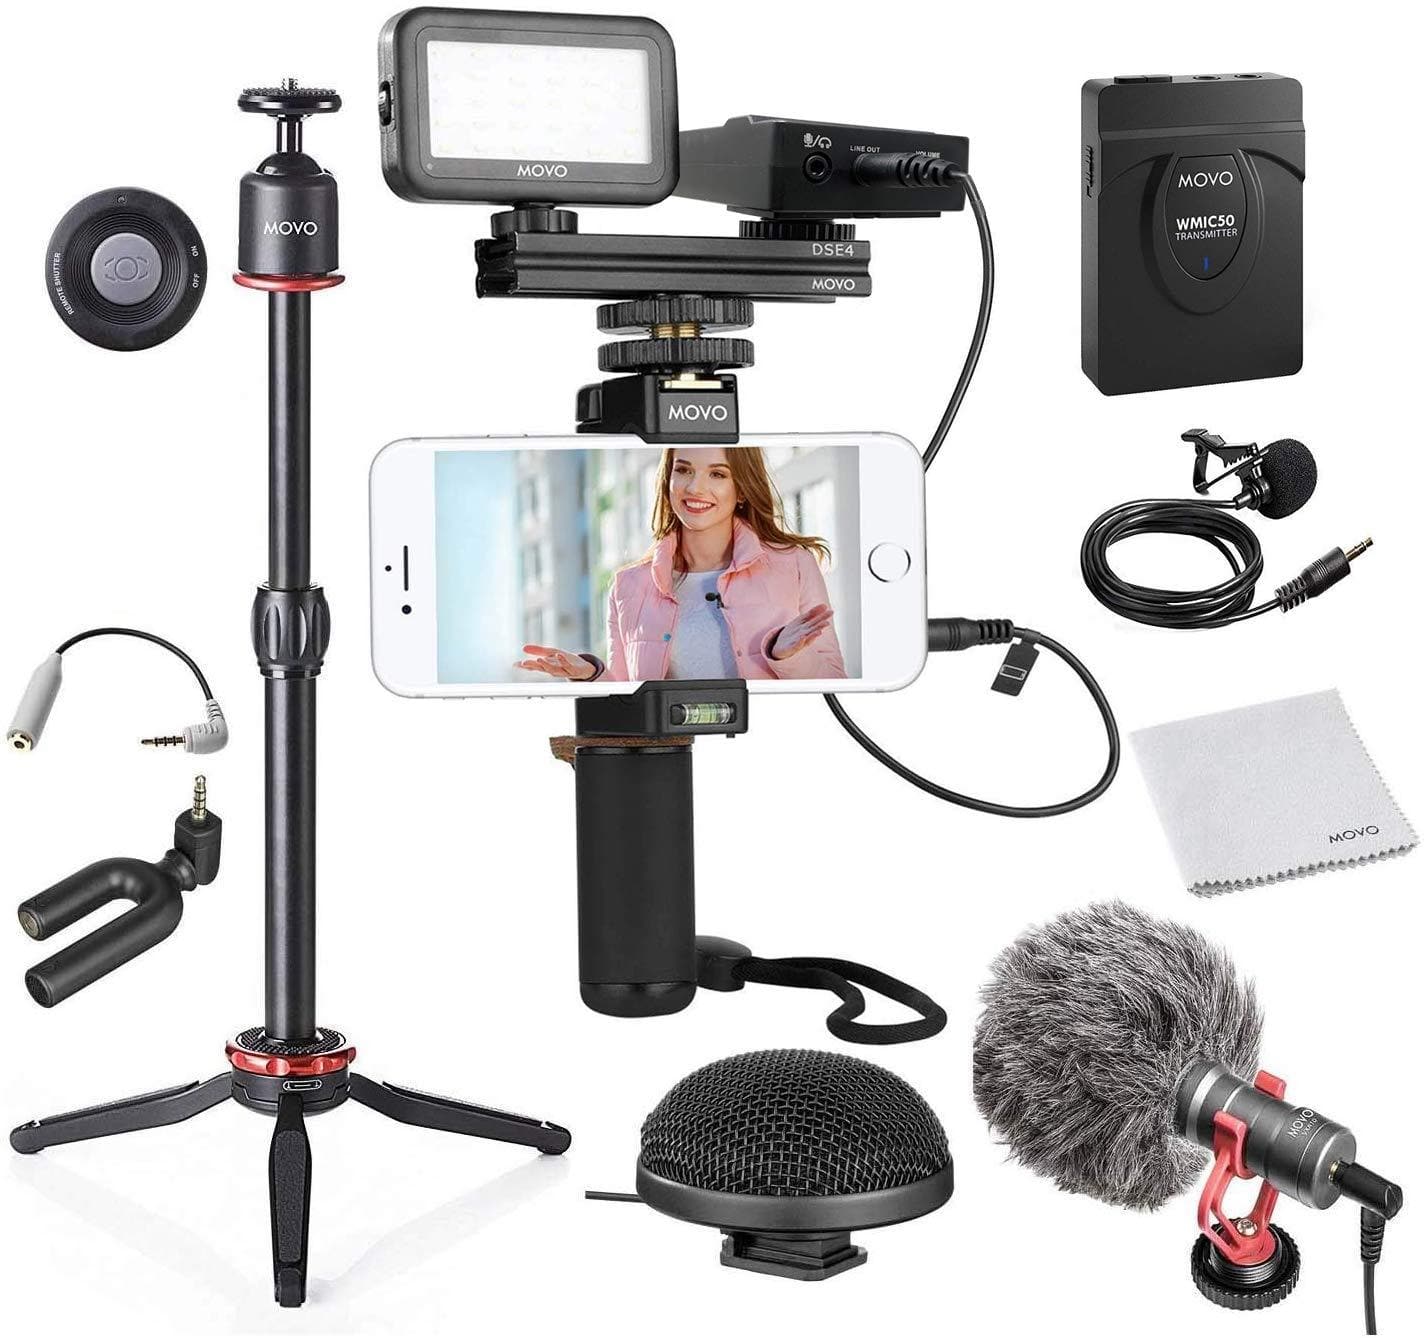 Phonevideo KIT8 | XL Smartphone Video Production Kit | Movo